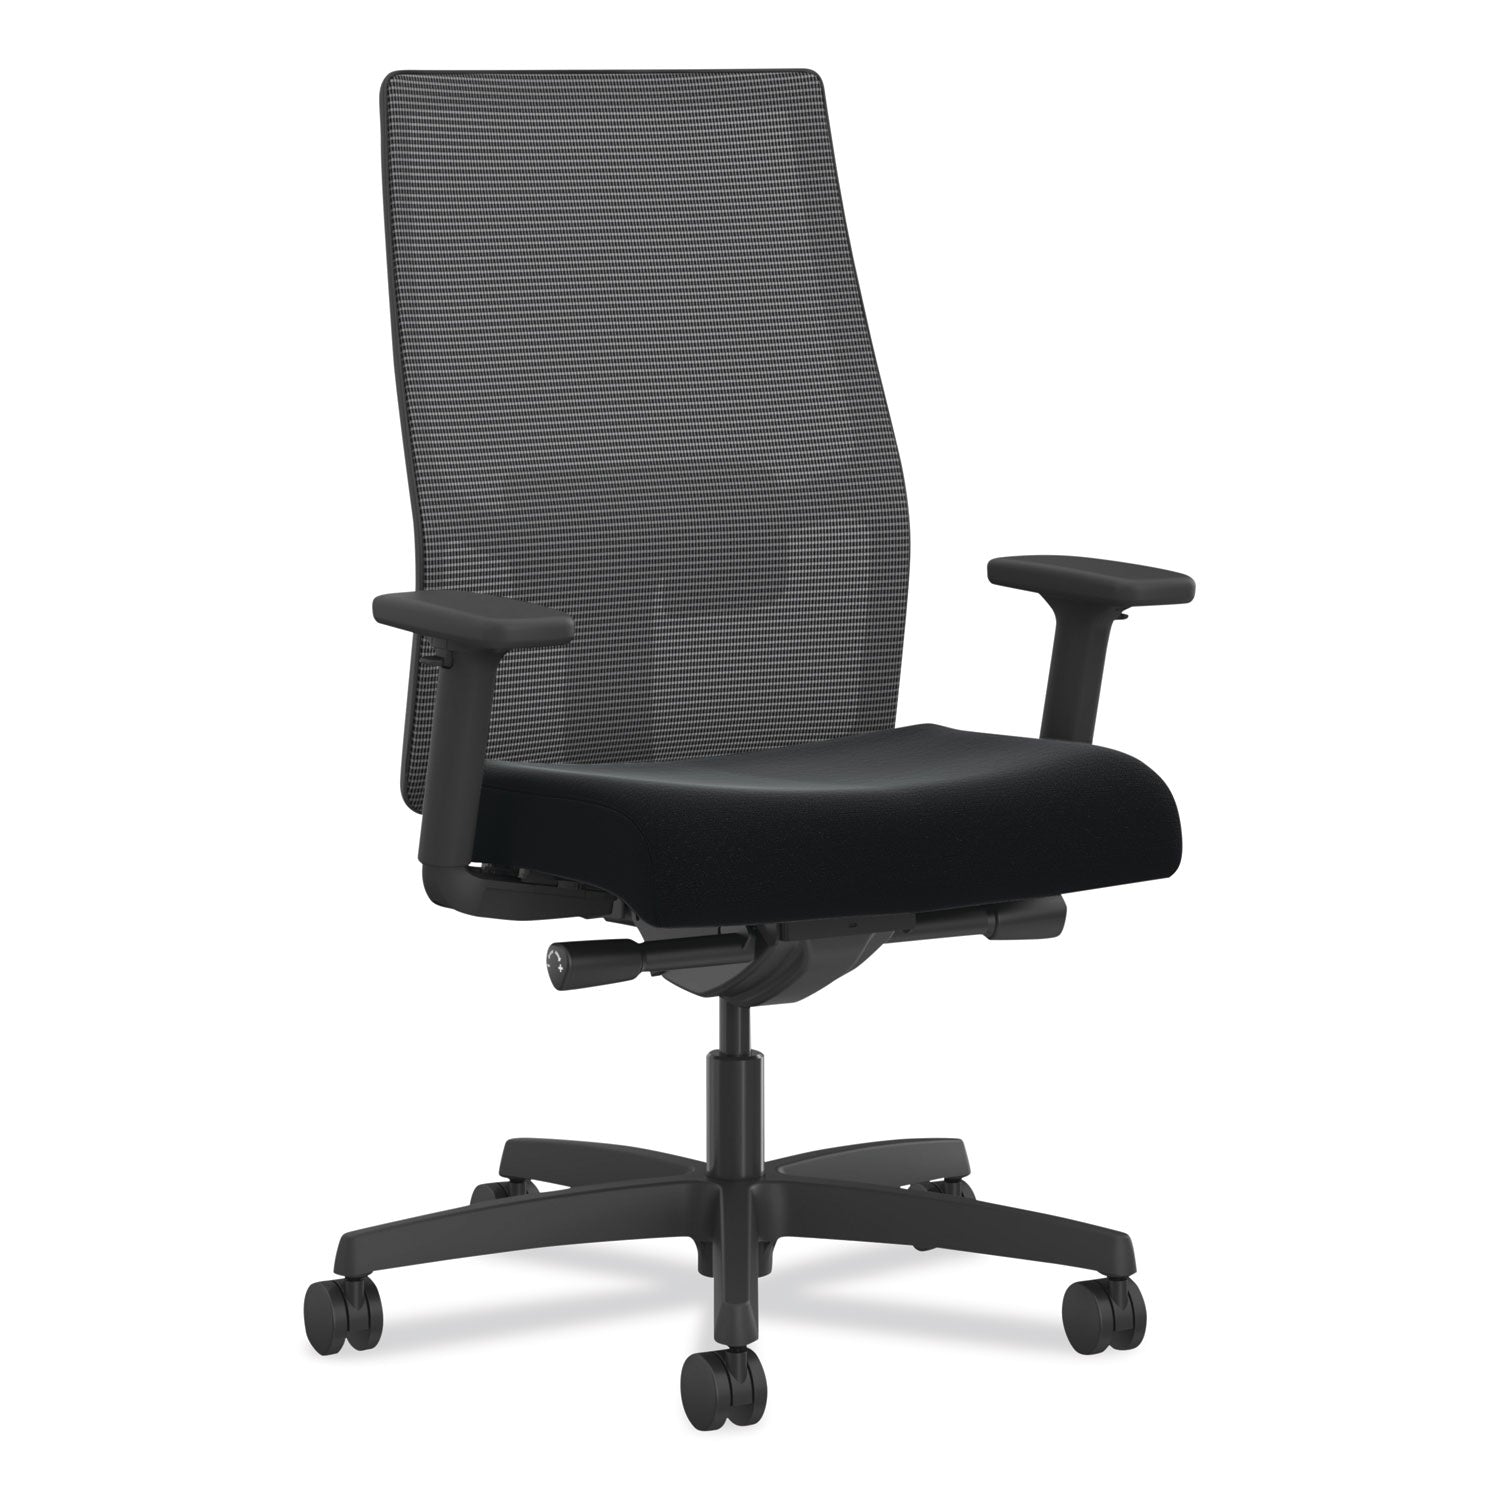 ignition-20-4-way-stretch-mid-back-task-chair-green-adjustable-lumbar-support-black-seat-back-base-ships-in-7-10-bus-days_honi2mm2amc10kt - 1